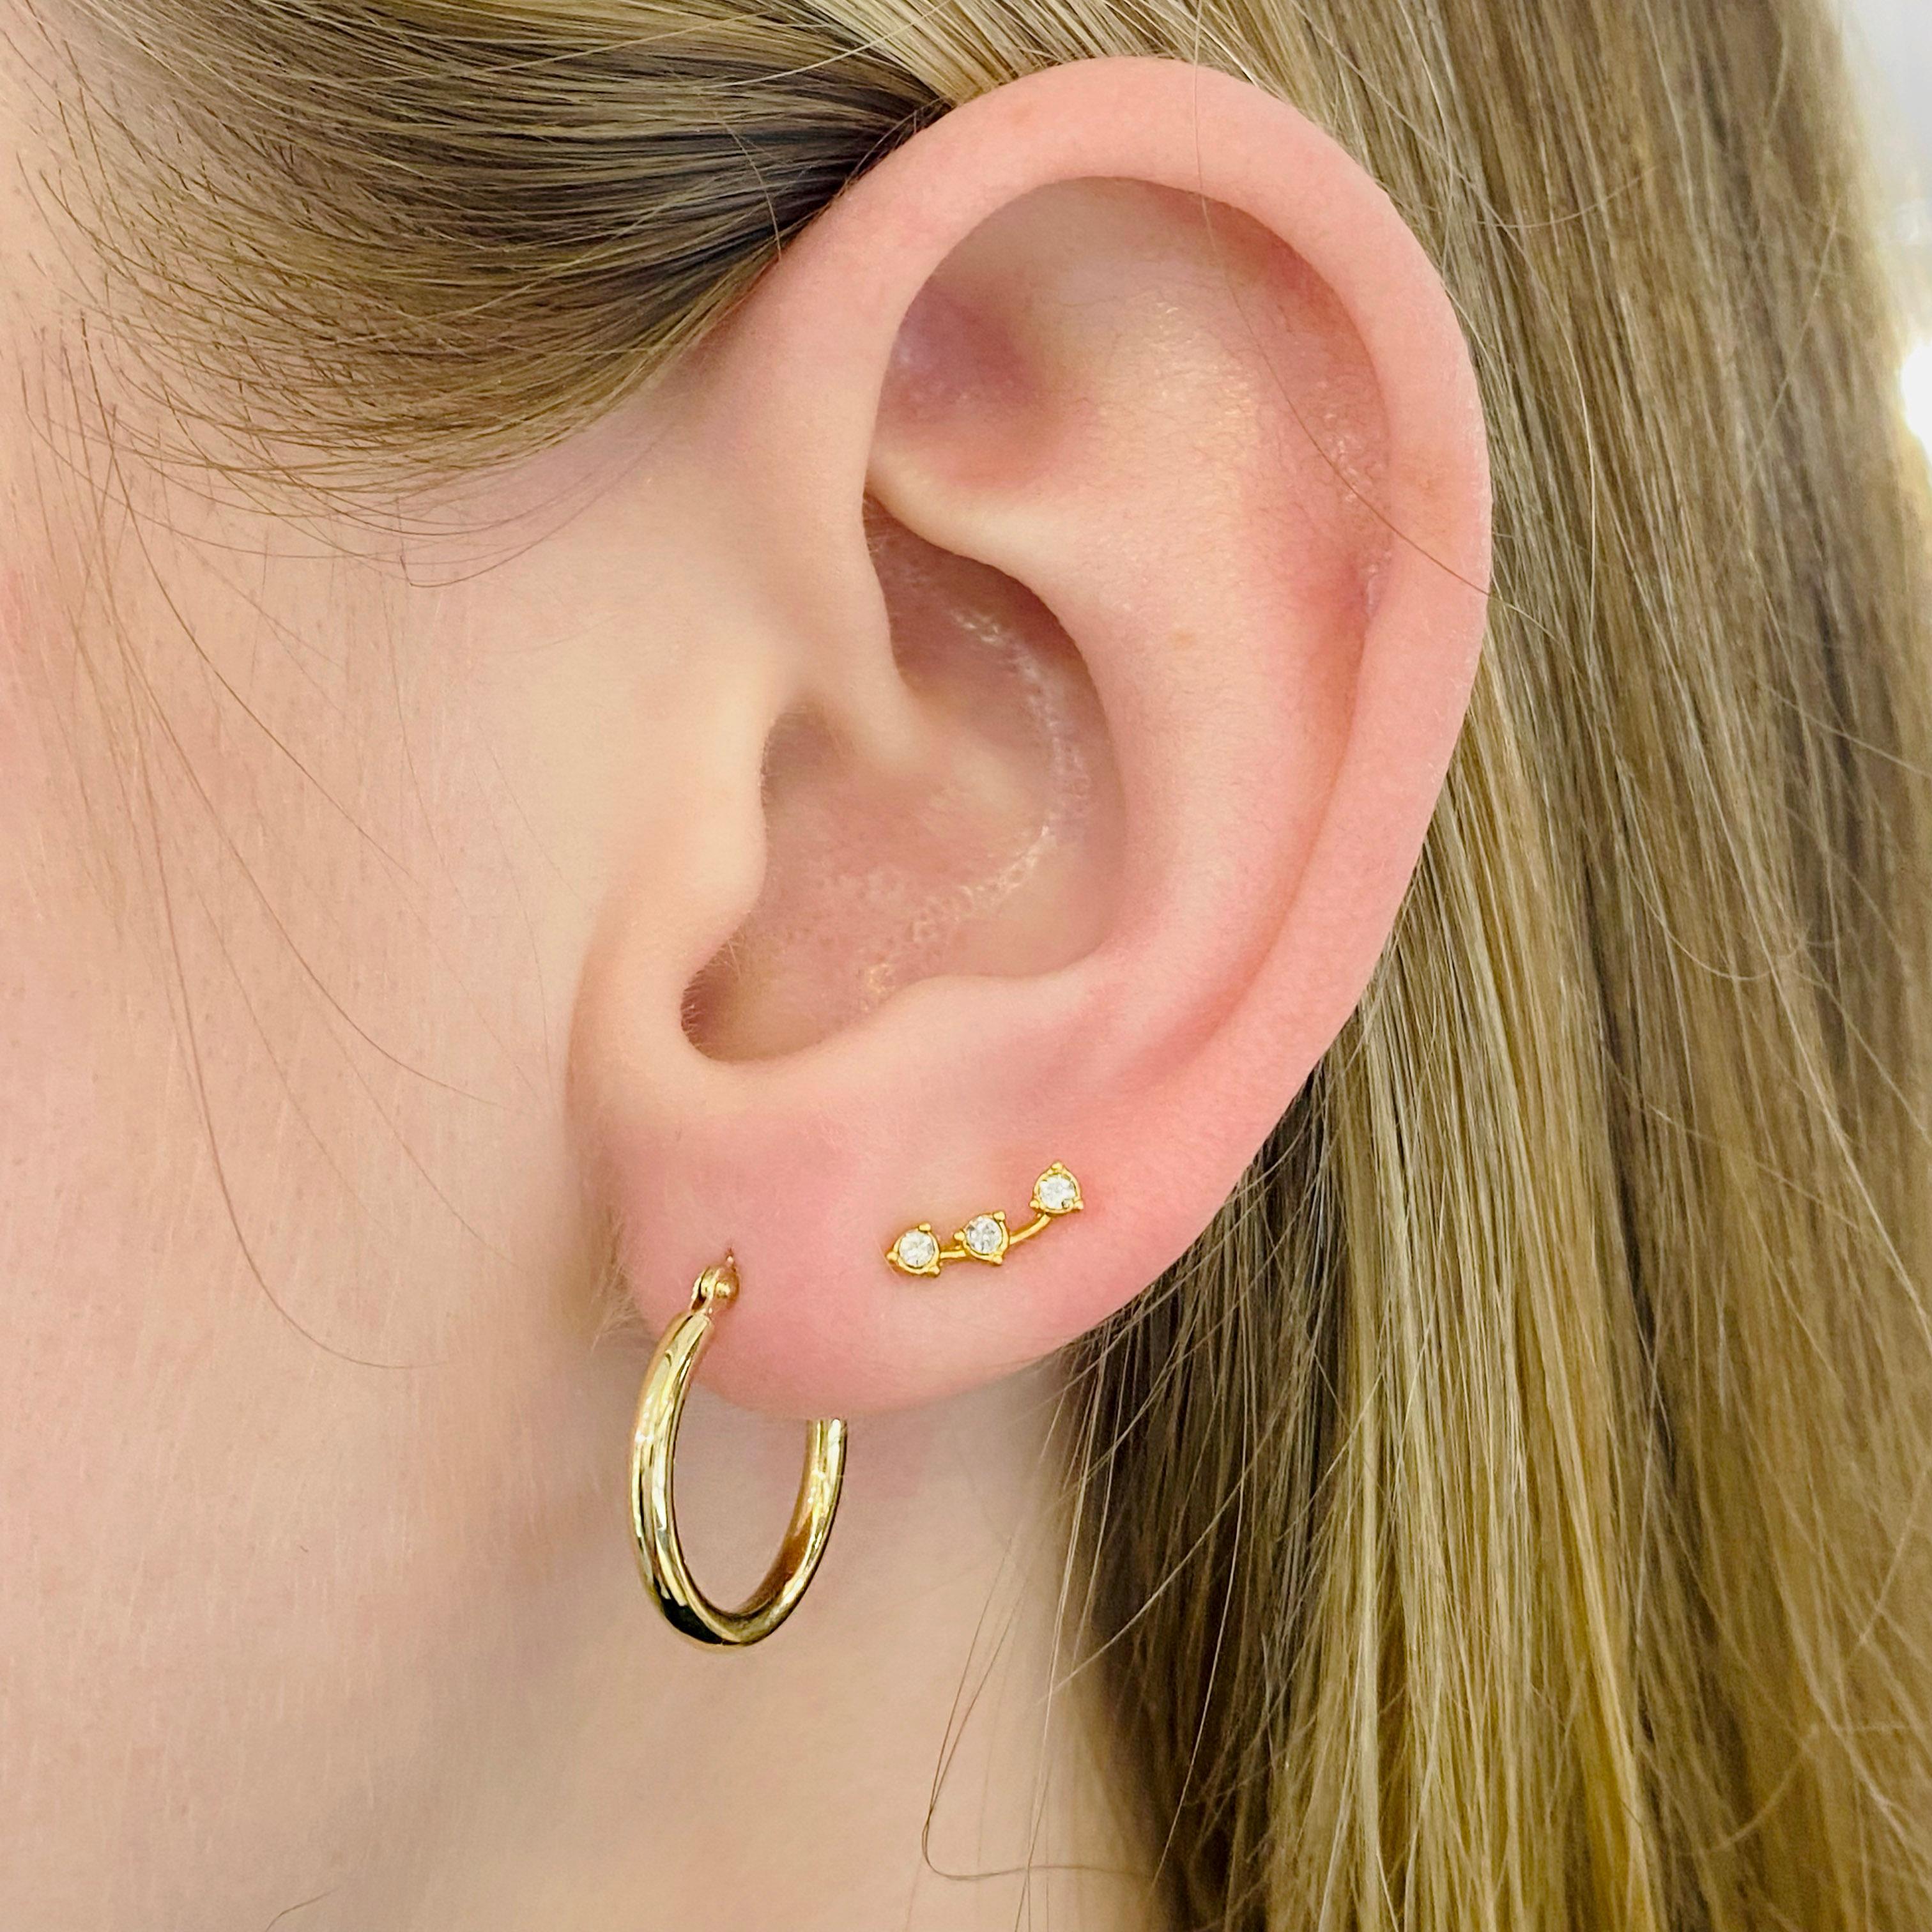 Gold hoop earrings are a staple in fine jewelry! These classic earrings are timeless and upgrade any outfit! The 14 karat yellow gold hoops are lightweight and comfortable to wear. They have a high polish finish  and an easy-to-use clasp. The